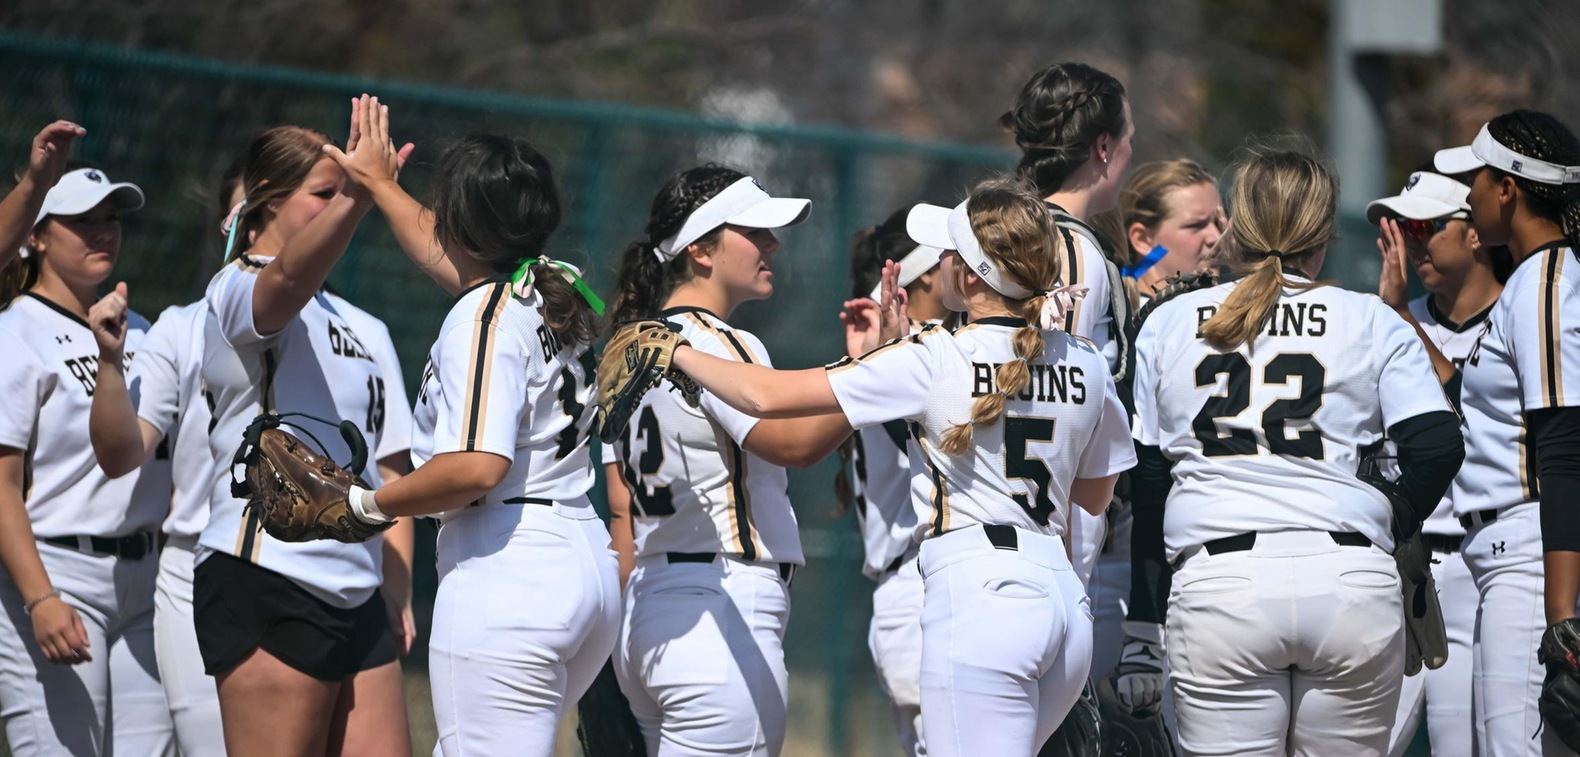 The Bruins registered 15 doubles and four home runs on the day.